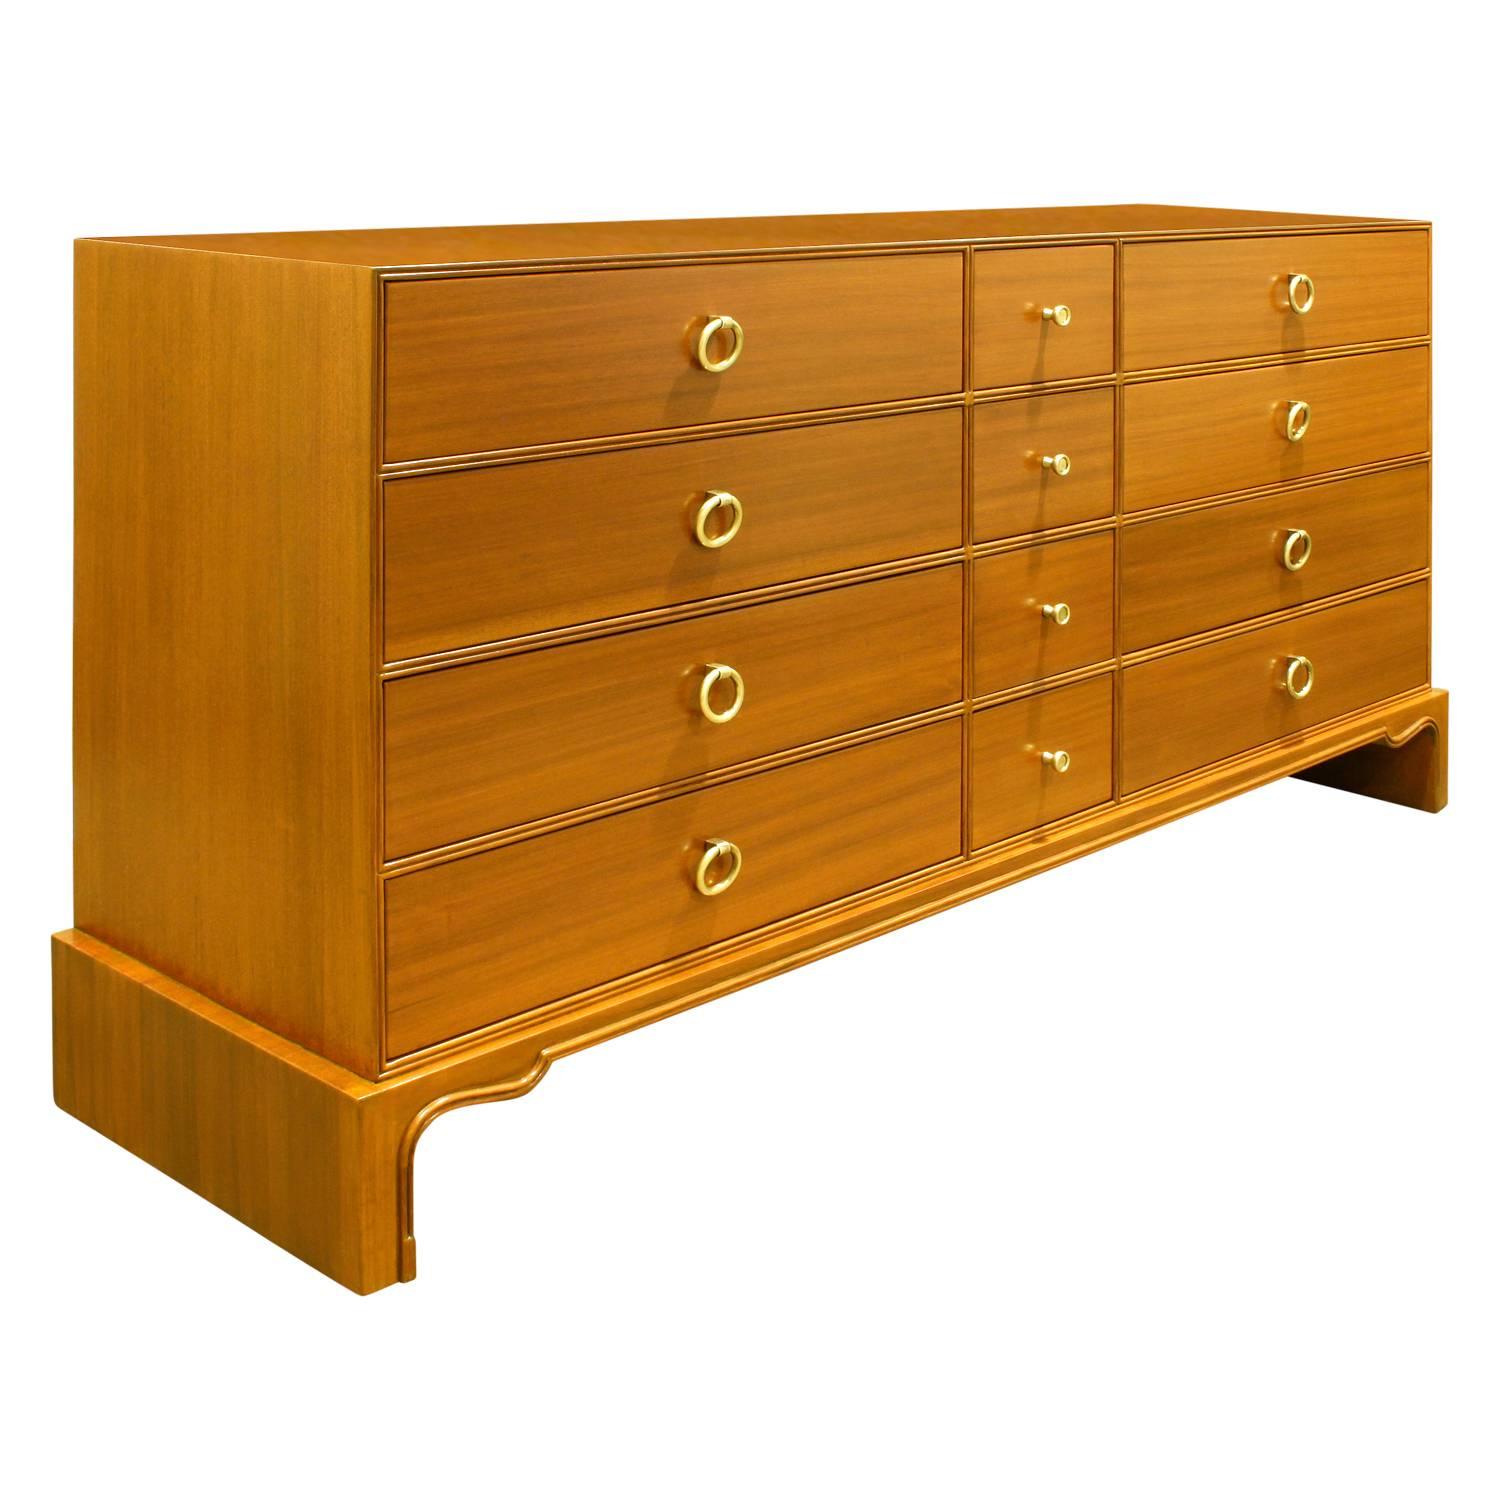 Mid-Century Modern Tommi Parzinger Chest of Drawers with Brass Pulls, 1940s